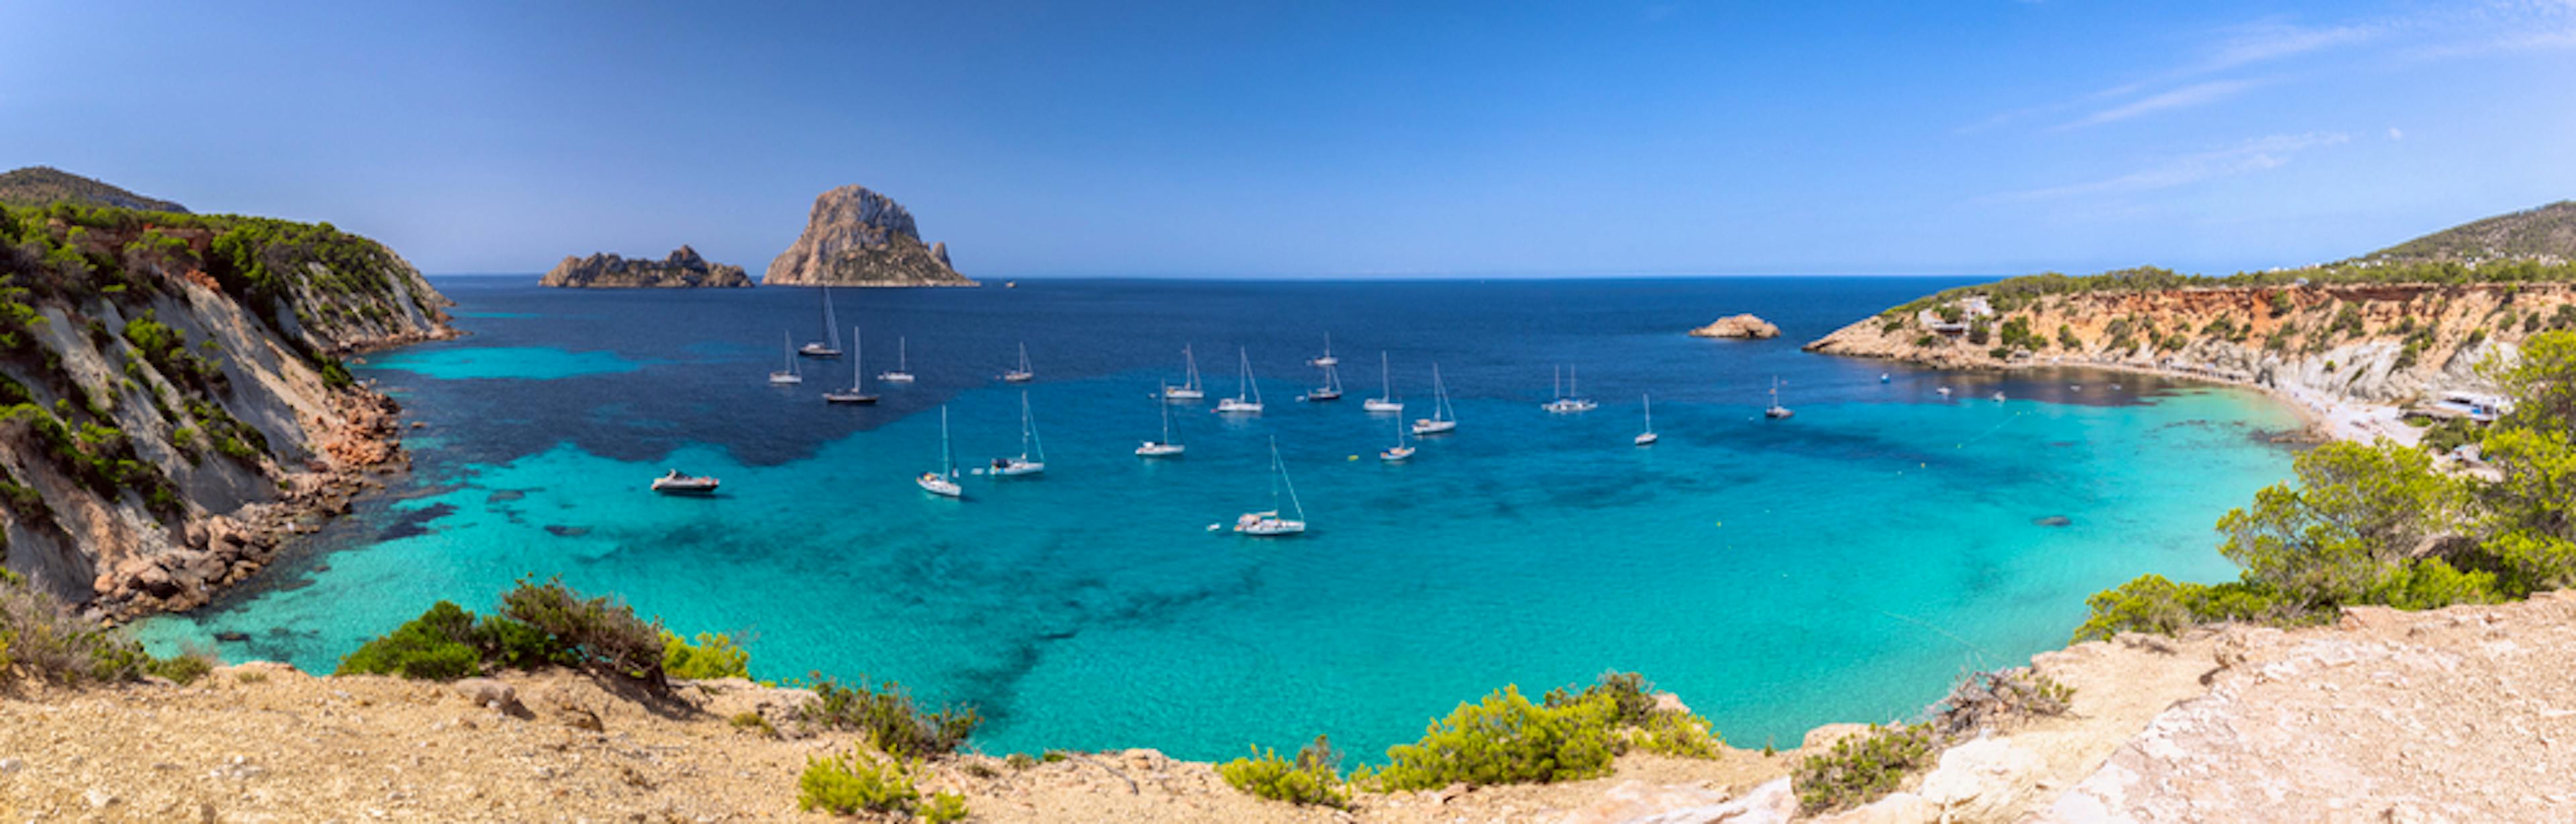 Best beaches in Ibiza to visit by boat